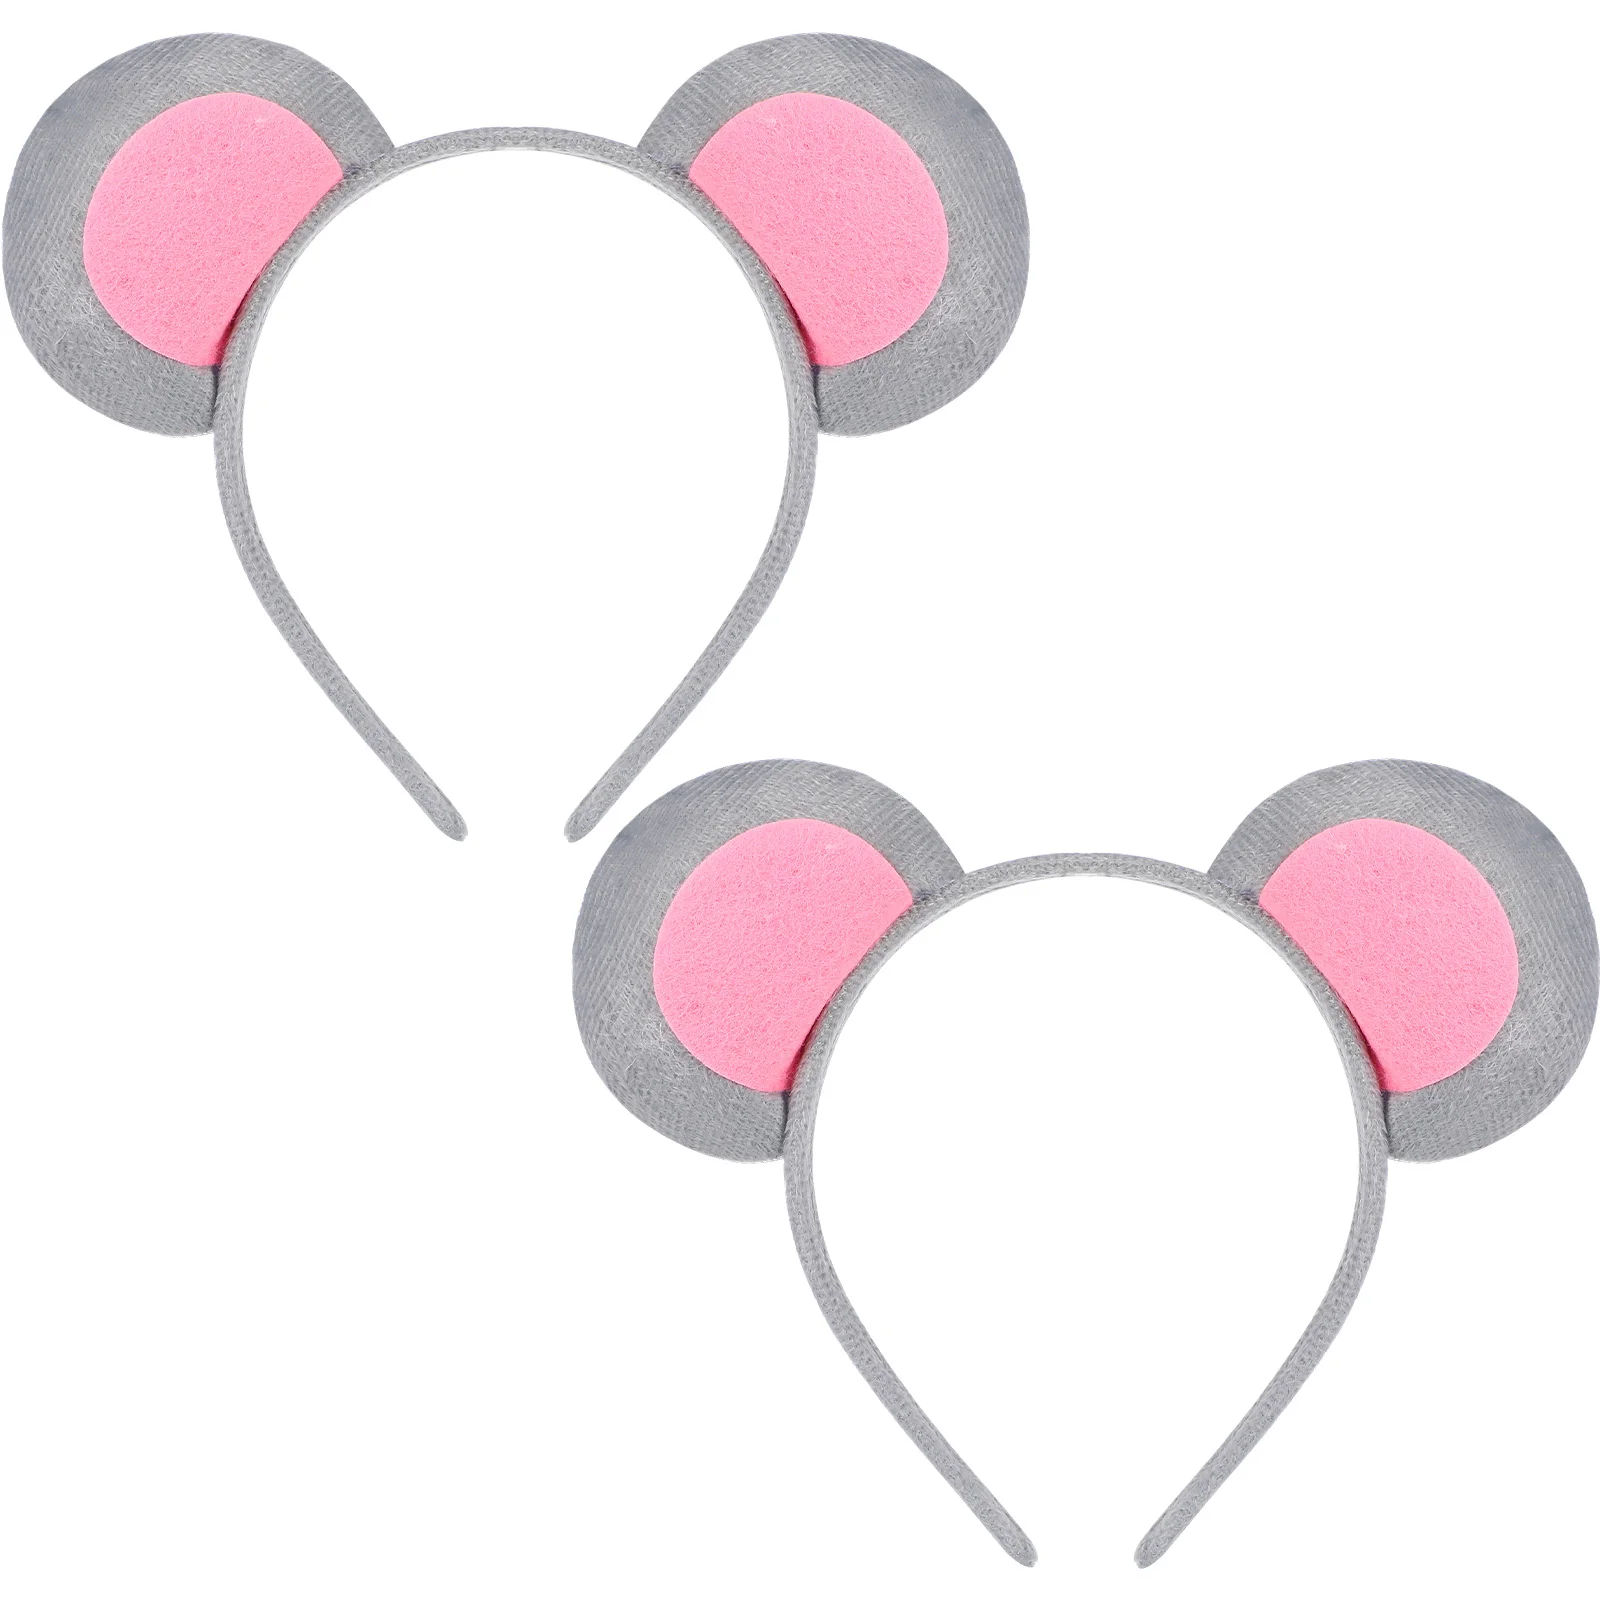 2pcs badminton keychain and racket keychain funny key ring sports souvenirs gift for themed party favor Plush Mouse Ear Headband 2Pcs Ear Headbands Mice Costume Ears Headbands Kitten Headwear Accessories for Kids Party Favor (